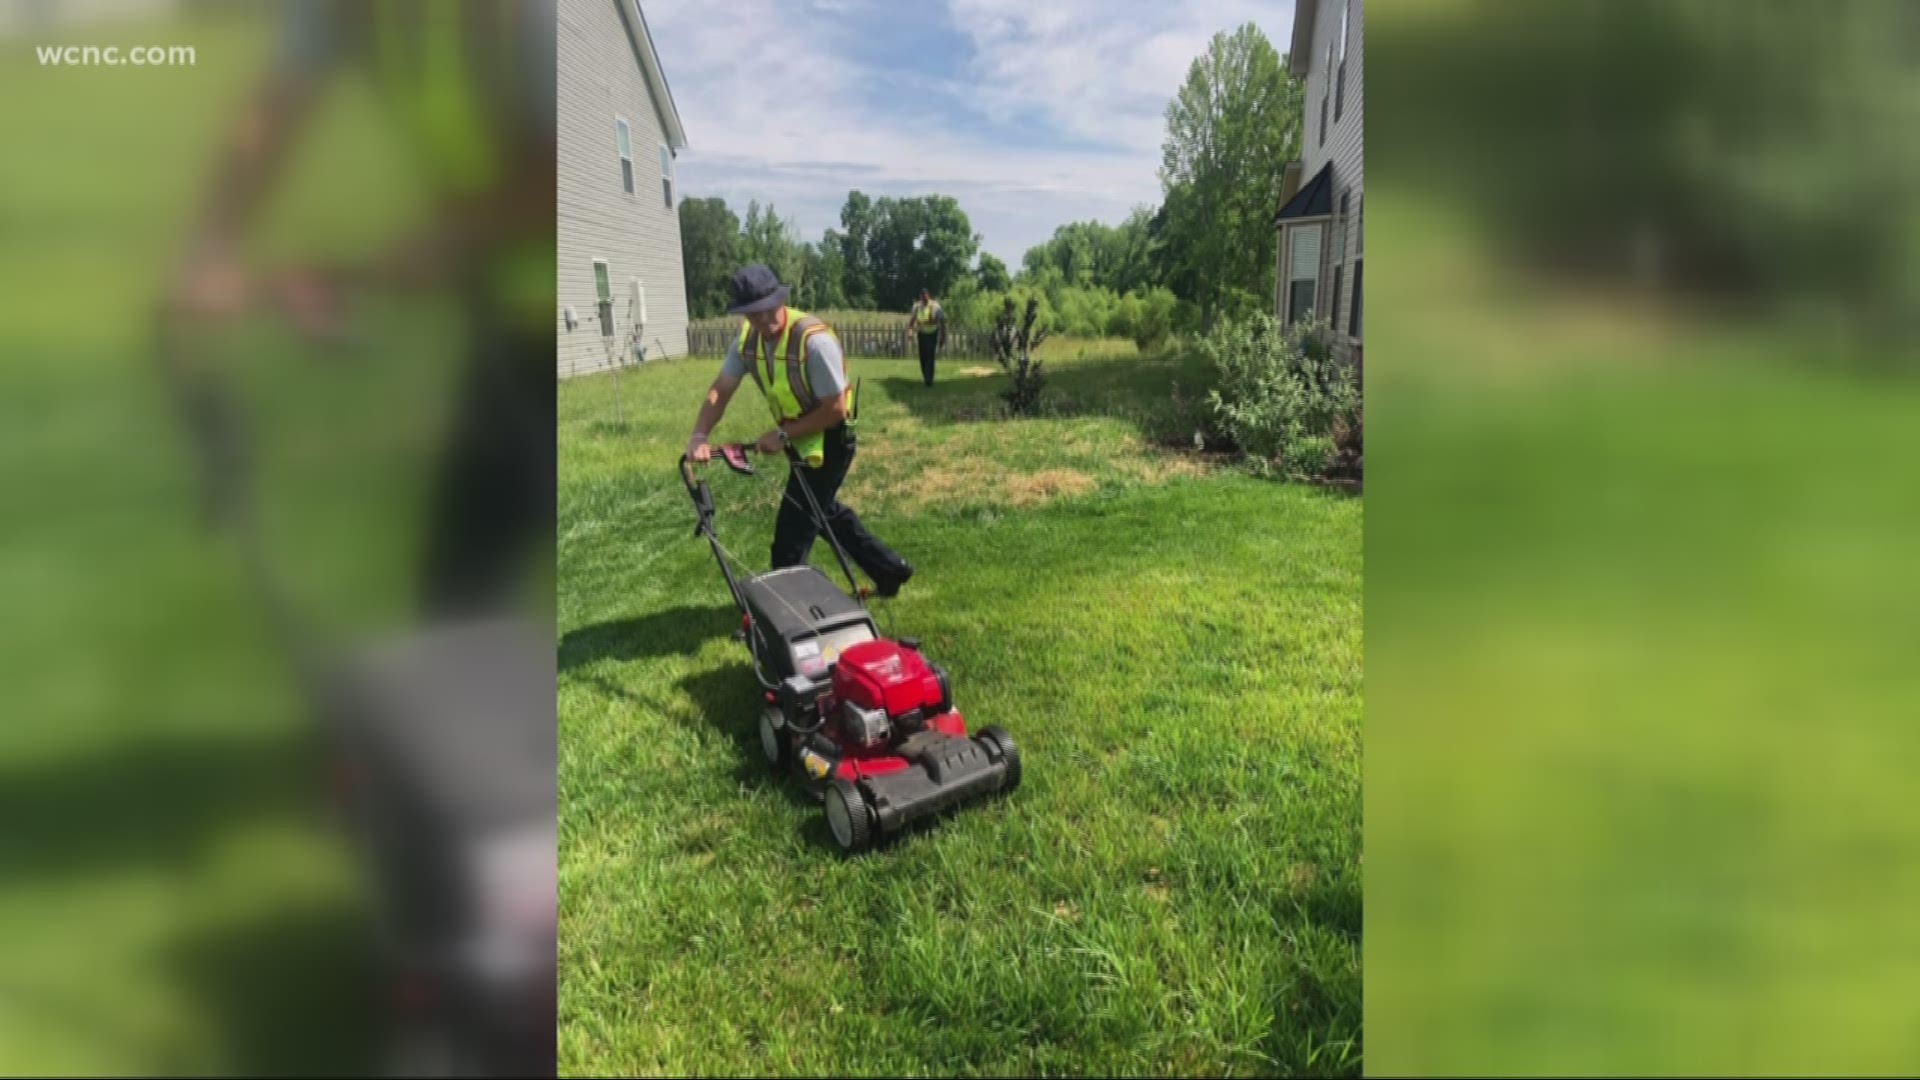 The firefighters dropped everything to help the woman mow her lawn, trim her bushes and even chat with her for a few minutes about the "joys in life."